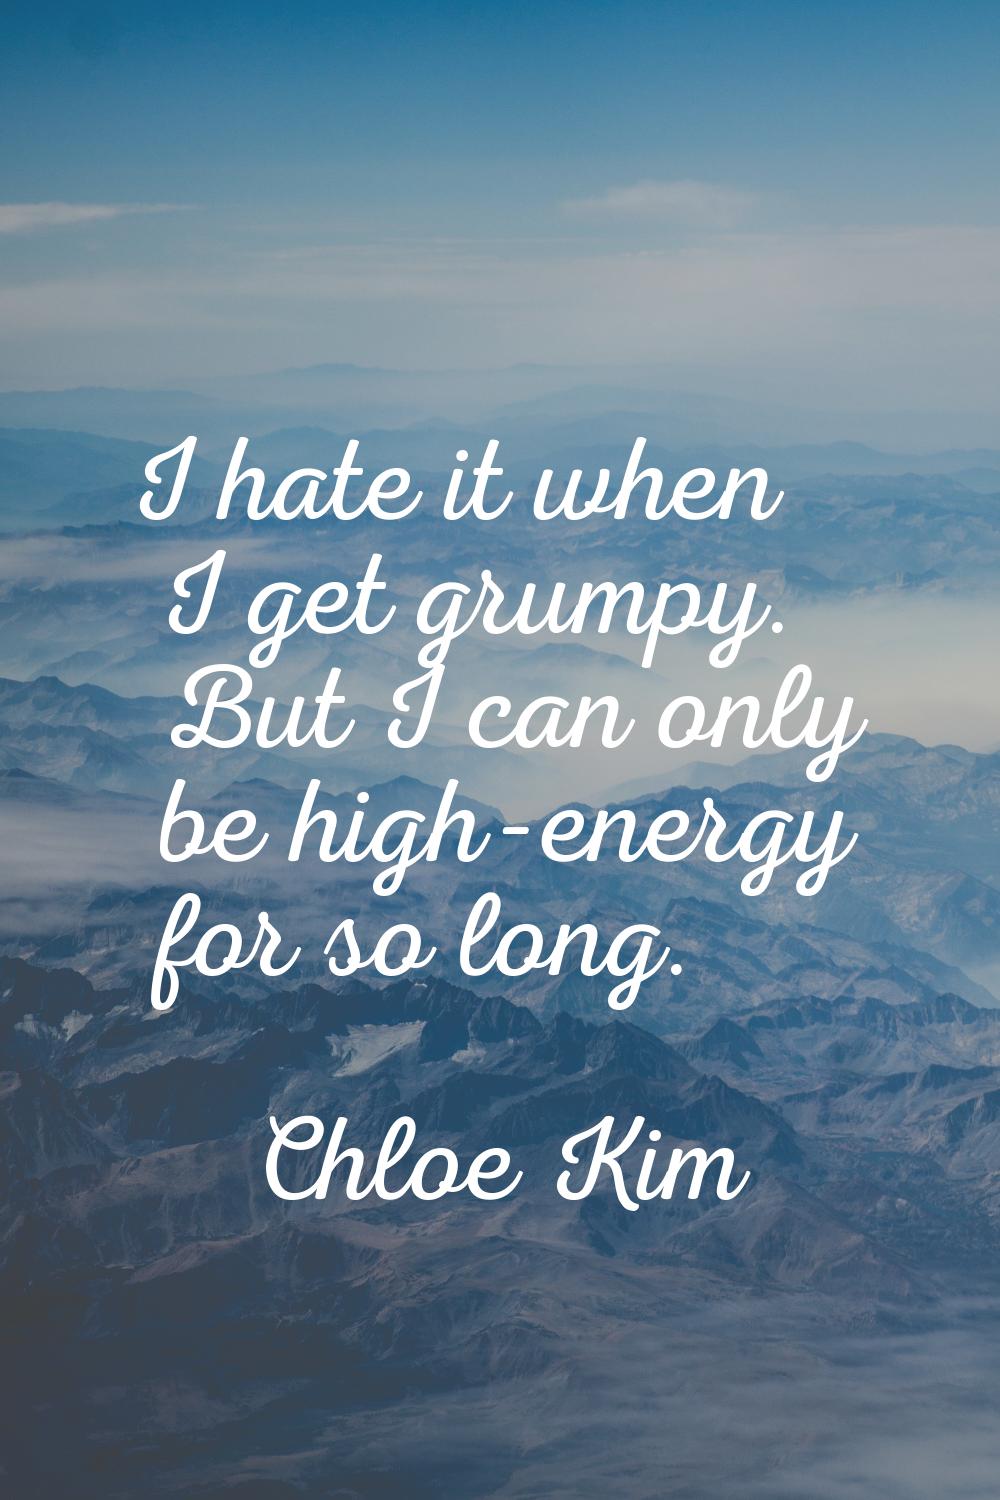 I hate it when I get grumpy. But I can only be high-energy for so long.